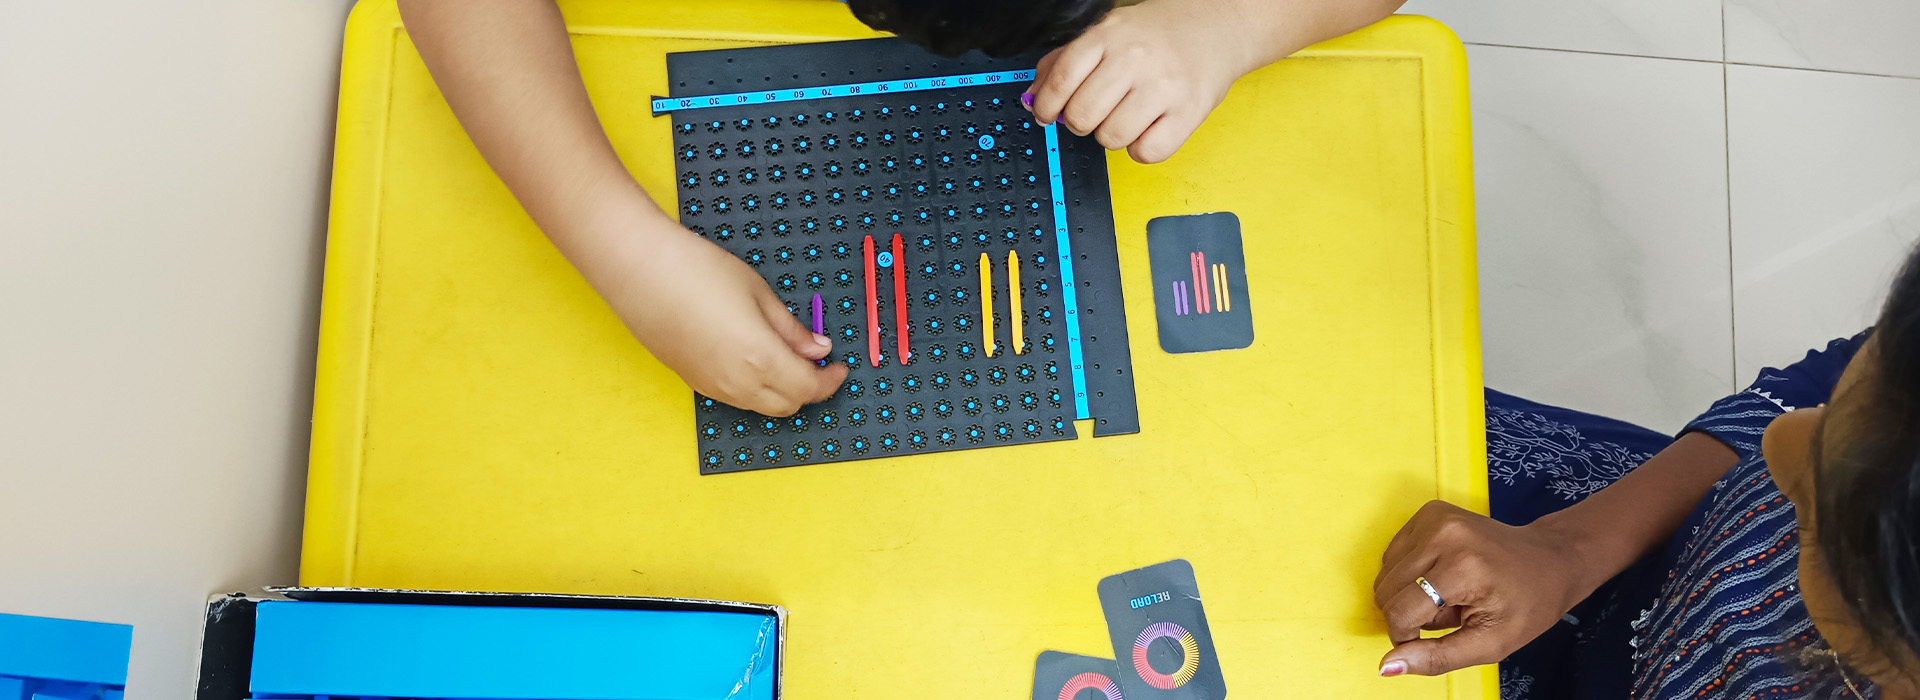 With the guidance of a speech therapist, children are enthusiastically engaged in the game of connecting dots of various colors, just like those on the small image cards provided. They are tasked with observing the color, shape, and length on each card, and then replicating it on a separate sheet of paper.